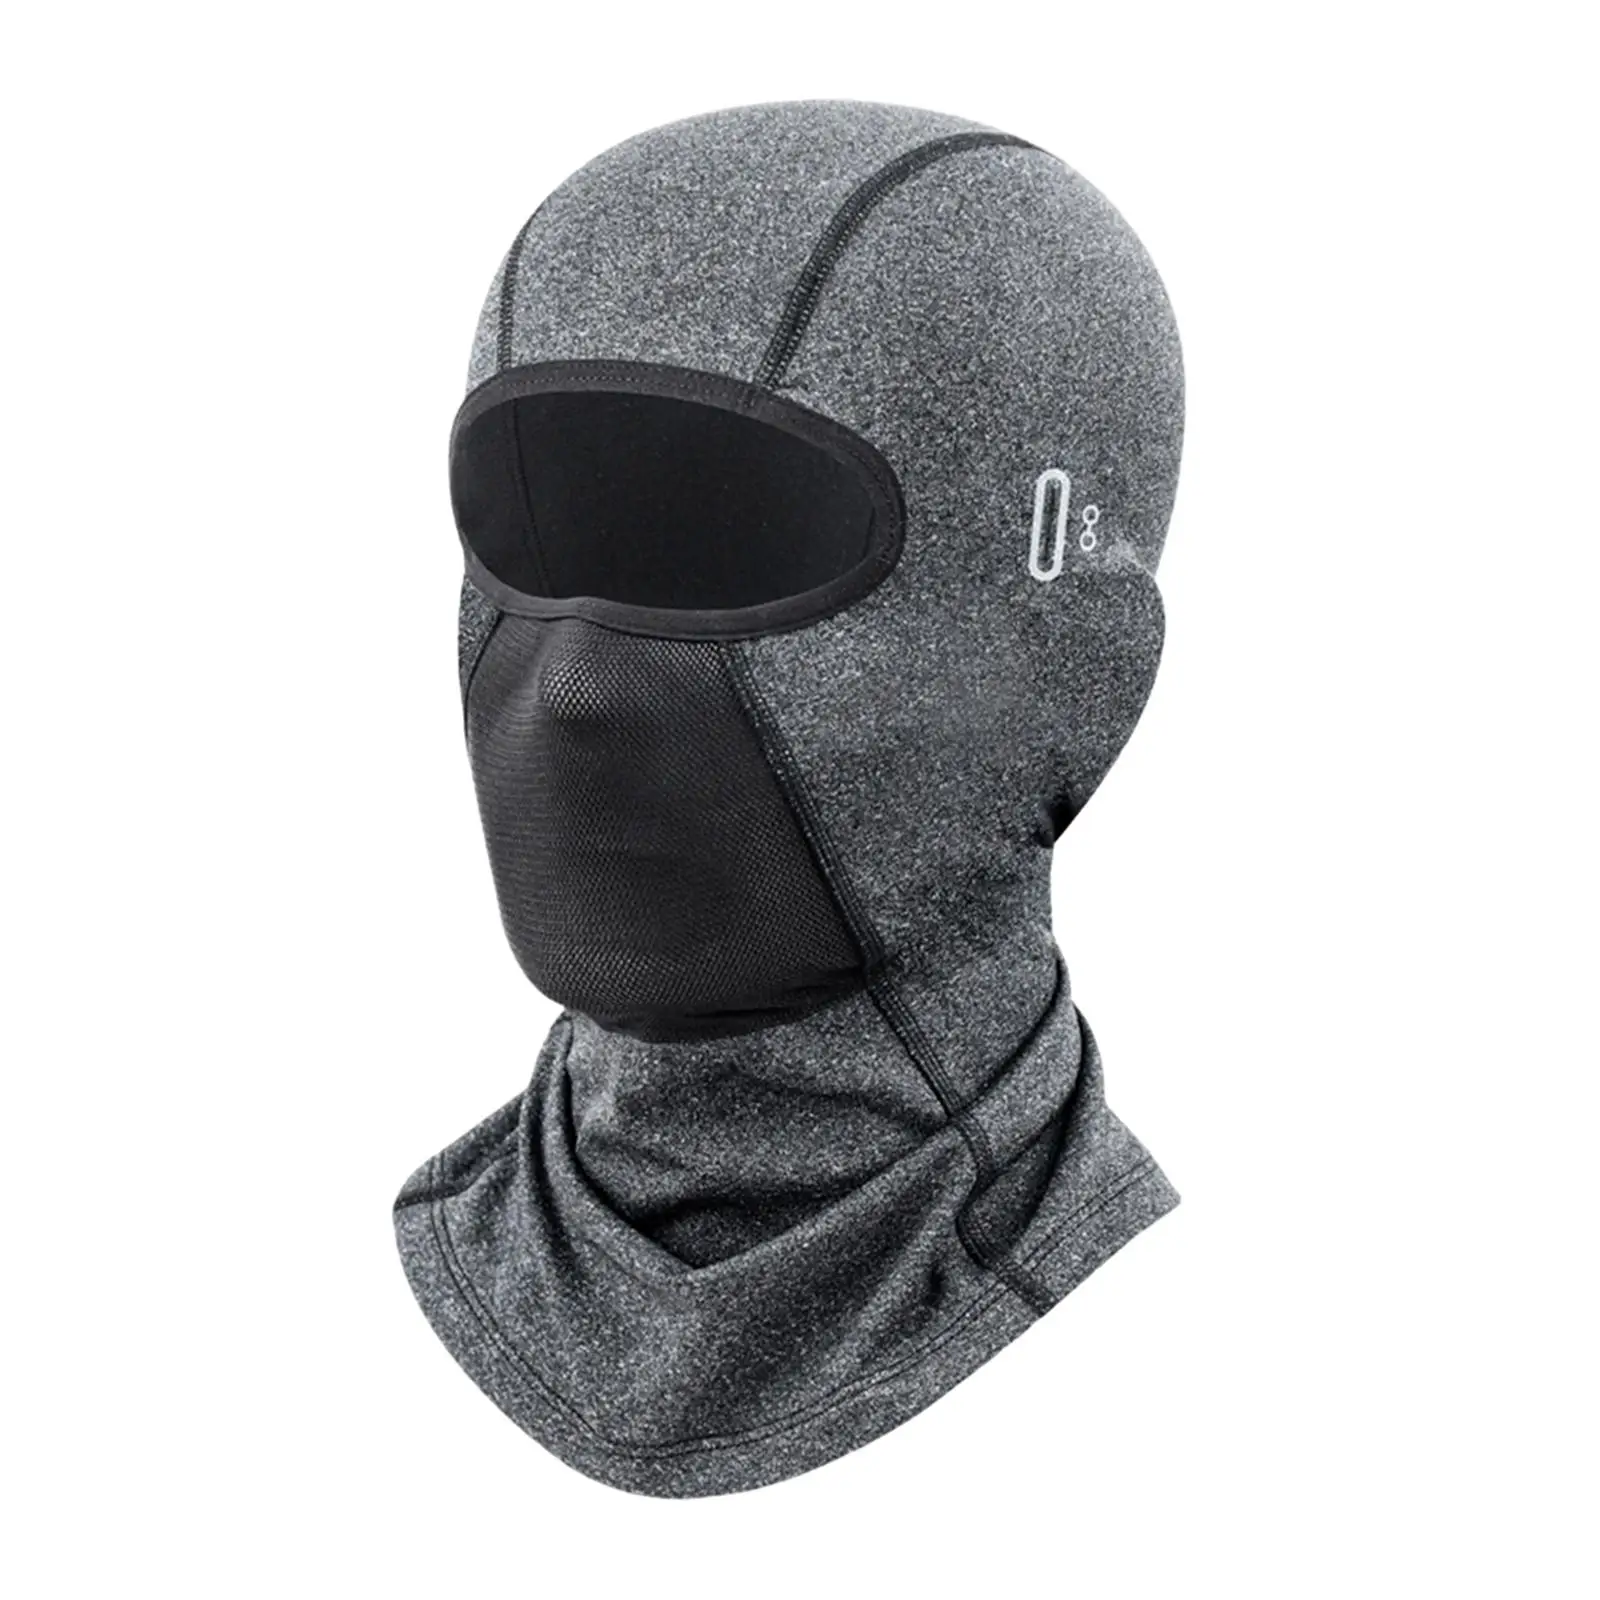 Ski Mask Headwear Winter Face Mask for Motorcycle Riding Hunting Hiking